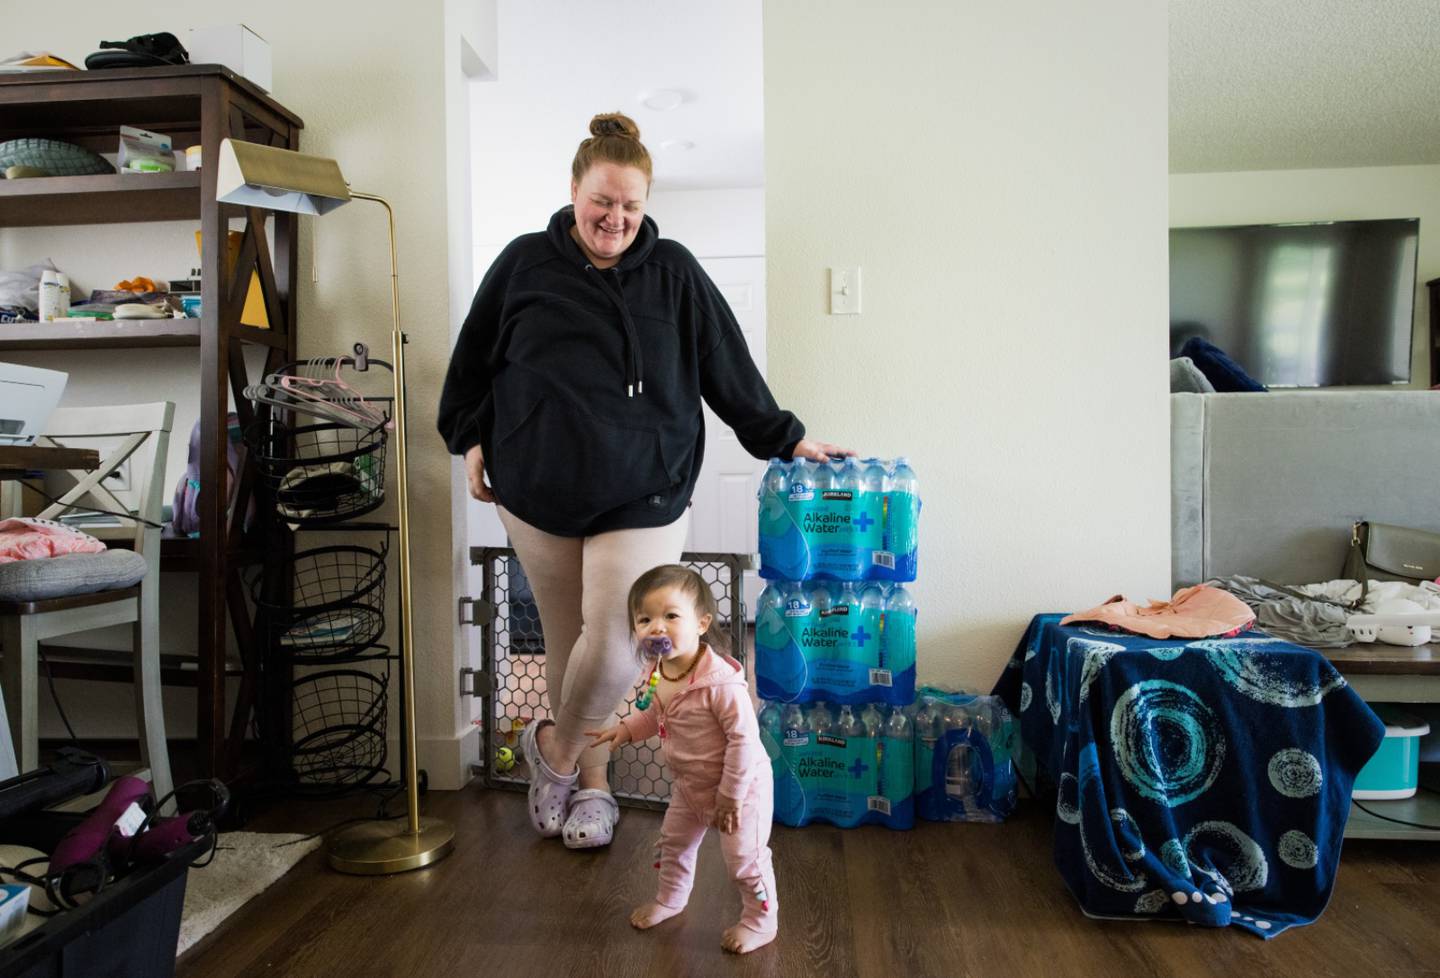 Heather Nguyen plays with her daughter, Chloe, in their home on Joint Base Lewis-McChord.